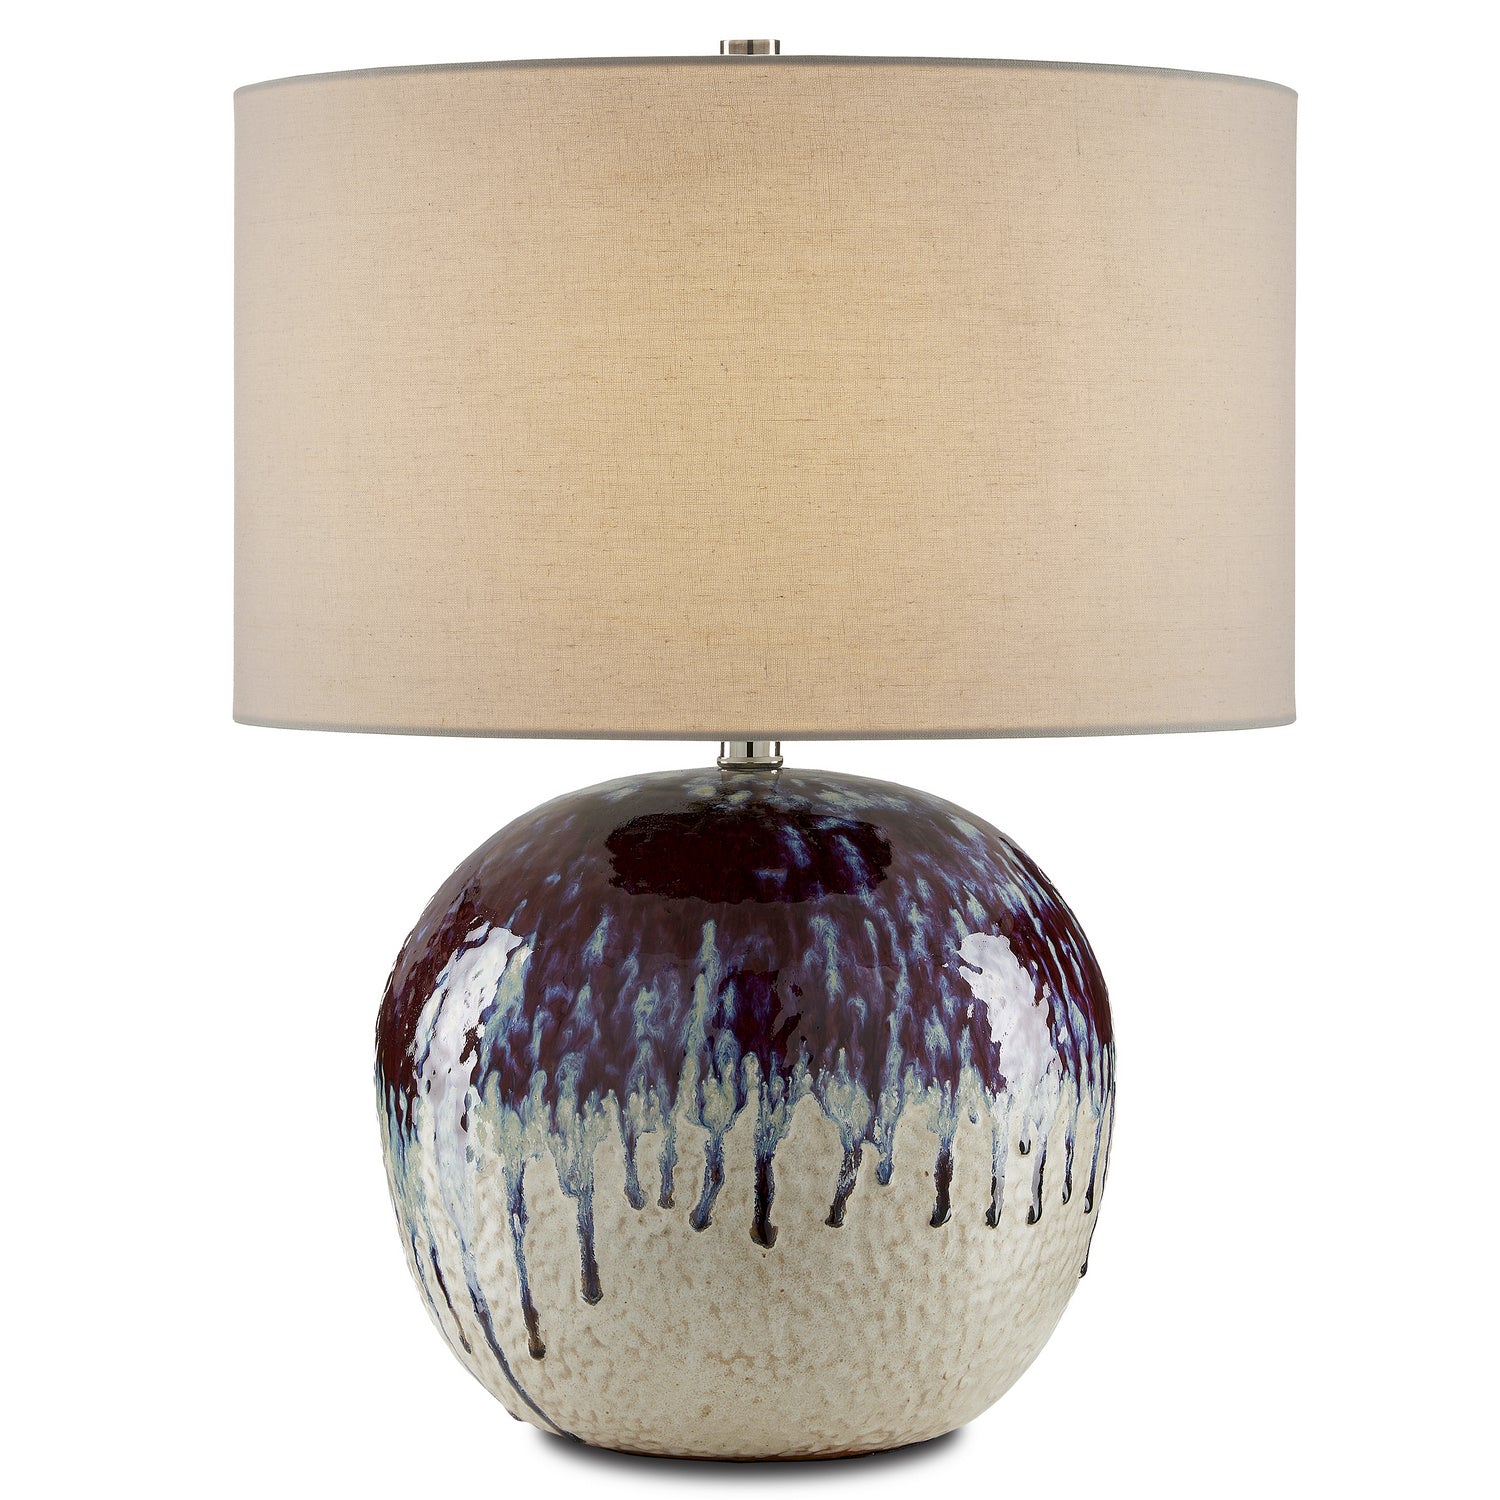 One Light Table Lamp from the Bessbrook collection in Reactive Blue/White/Red/Cream finish